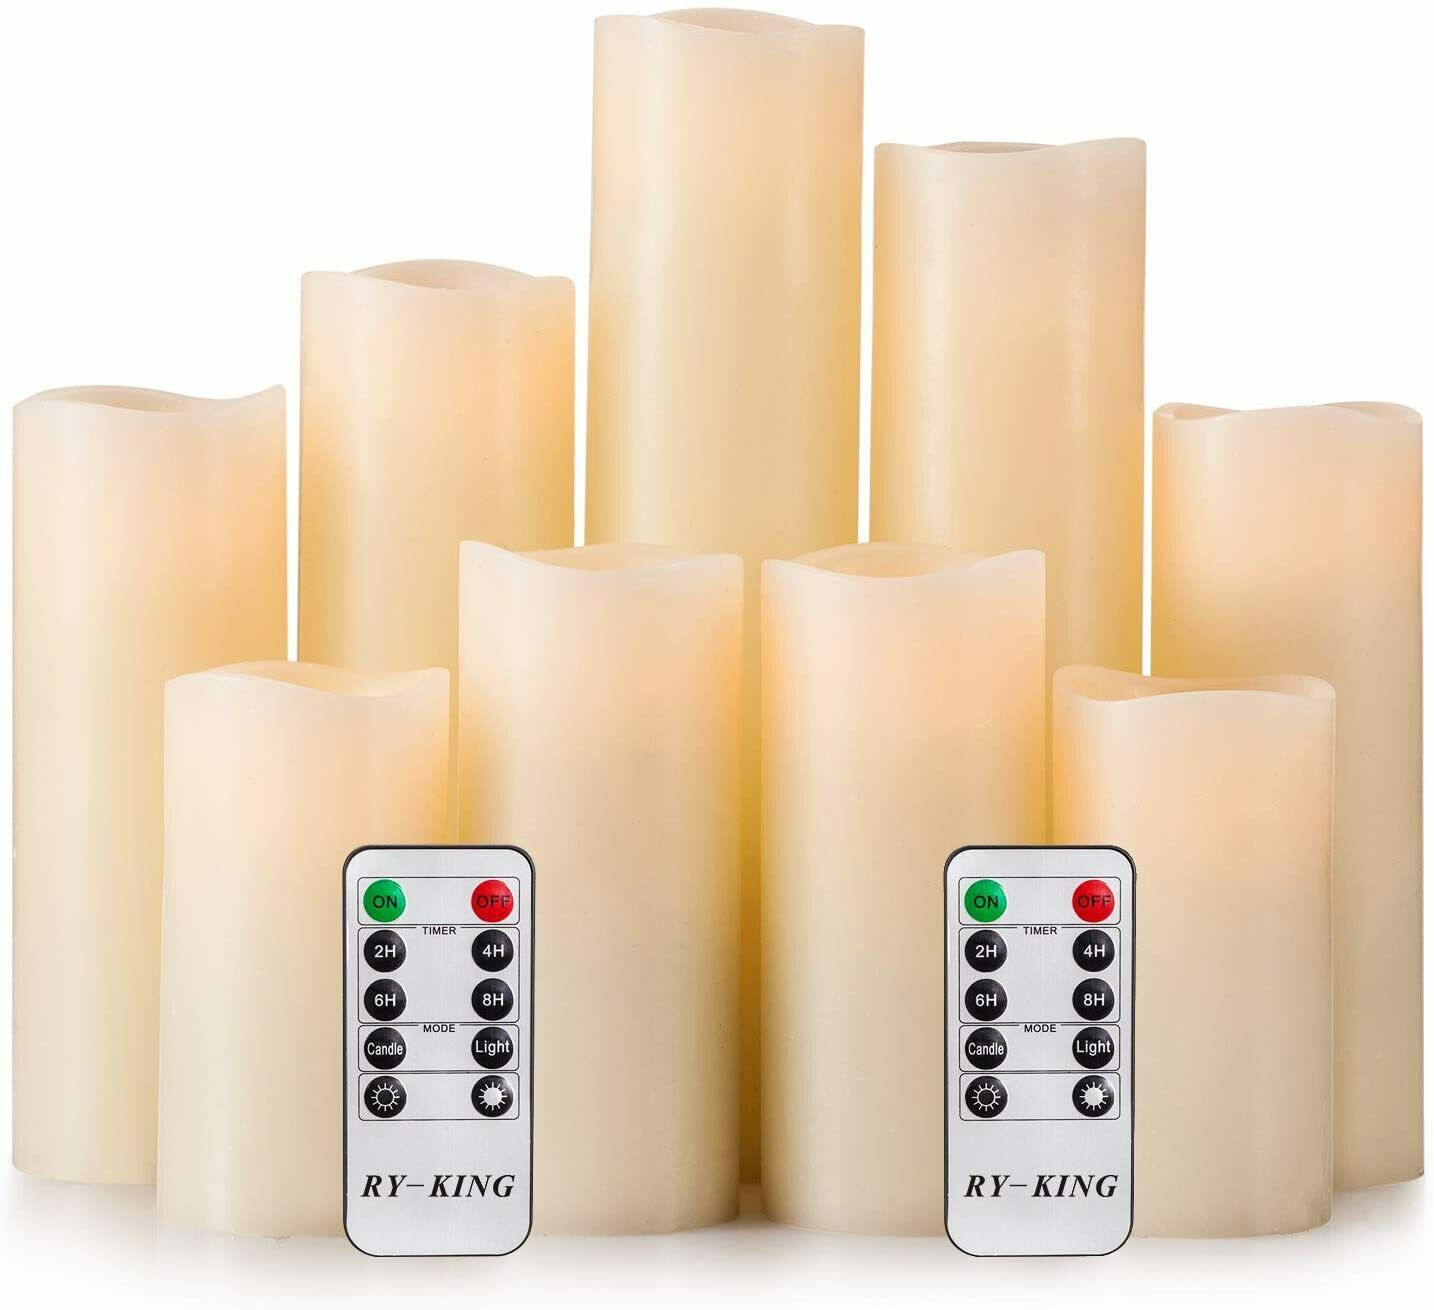 Battery Operated Flameless Candles Set of 9 Real Wax LED Remote Control & Timer